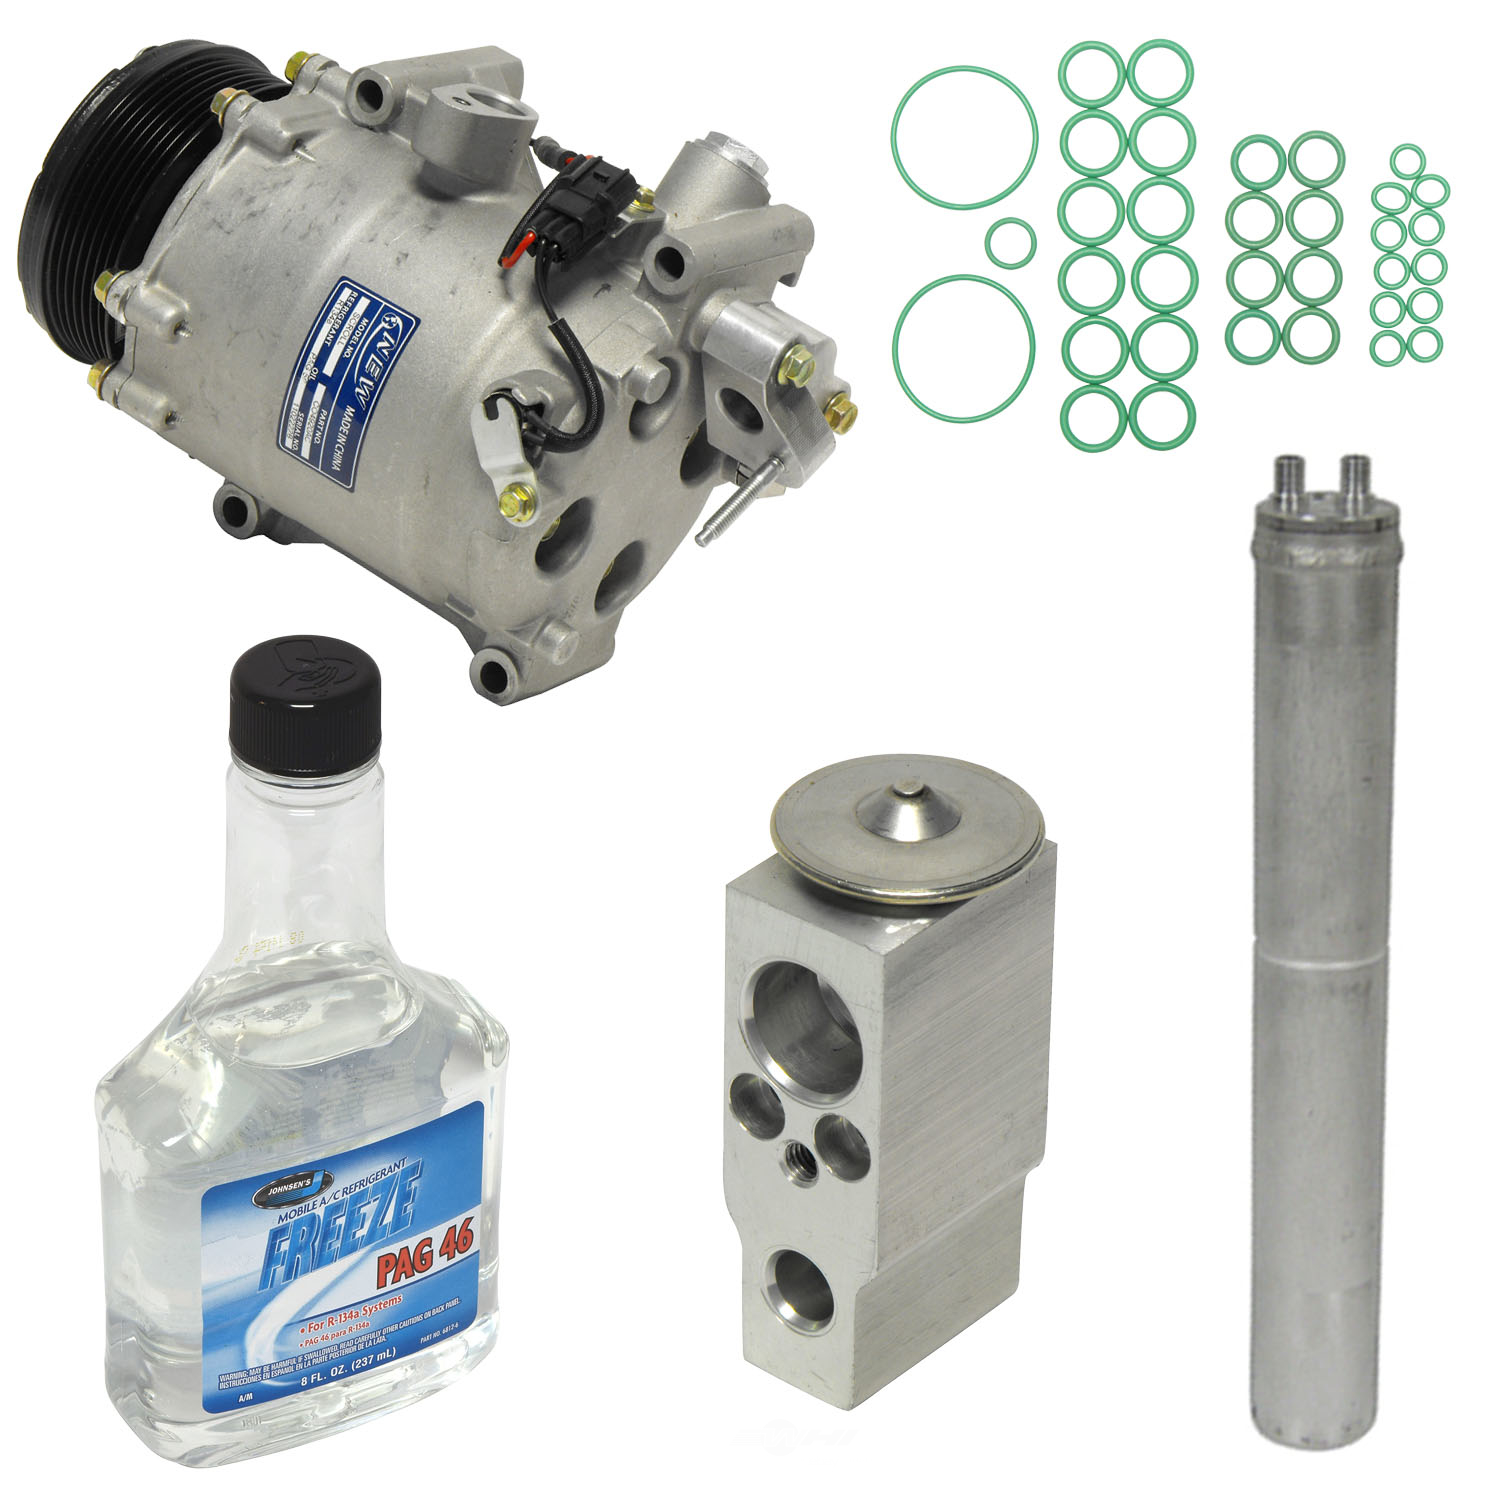 UNIVERSAL AIR CONDITIONER, INC. - Compressor Replacement Kit - UAC KT 4435